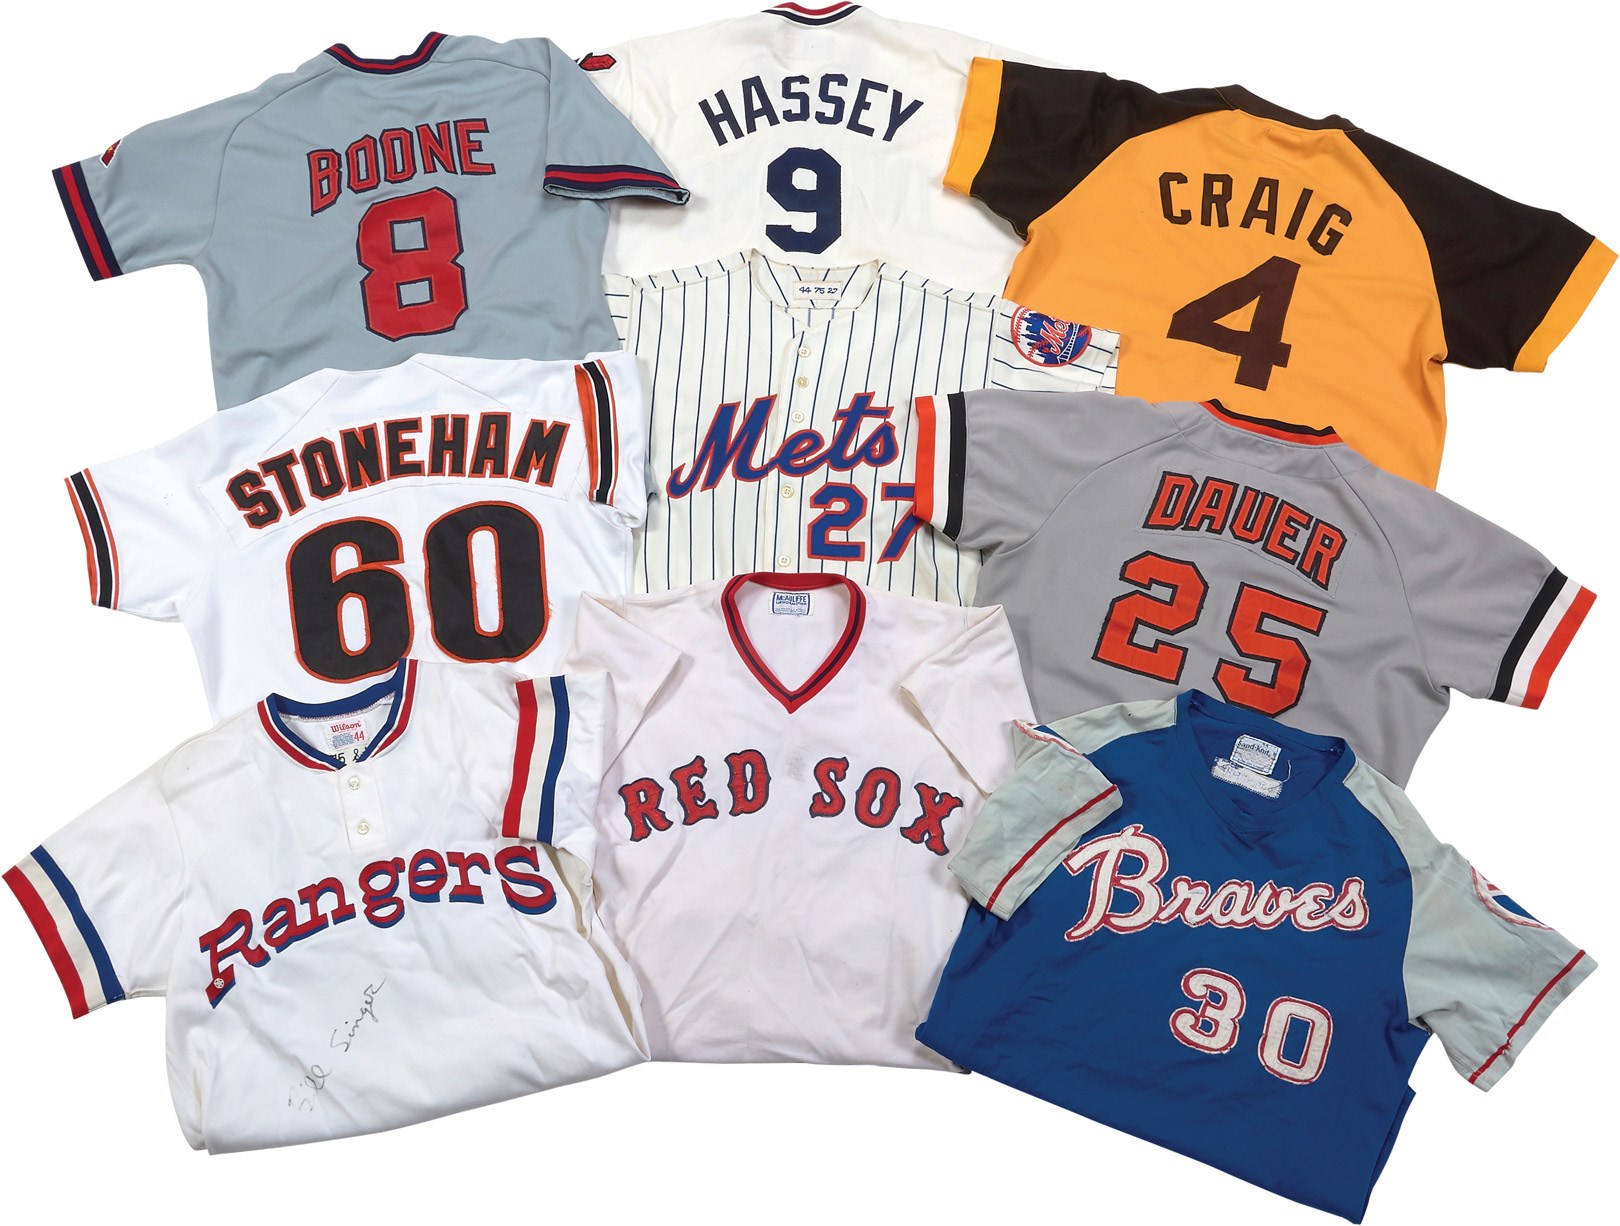 1970s Game Used Baseball Knits Collection (9)